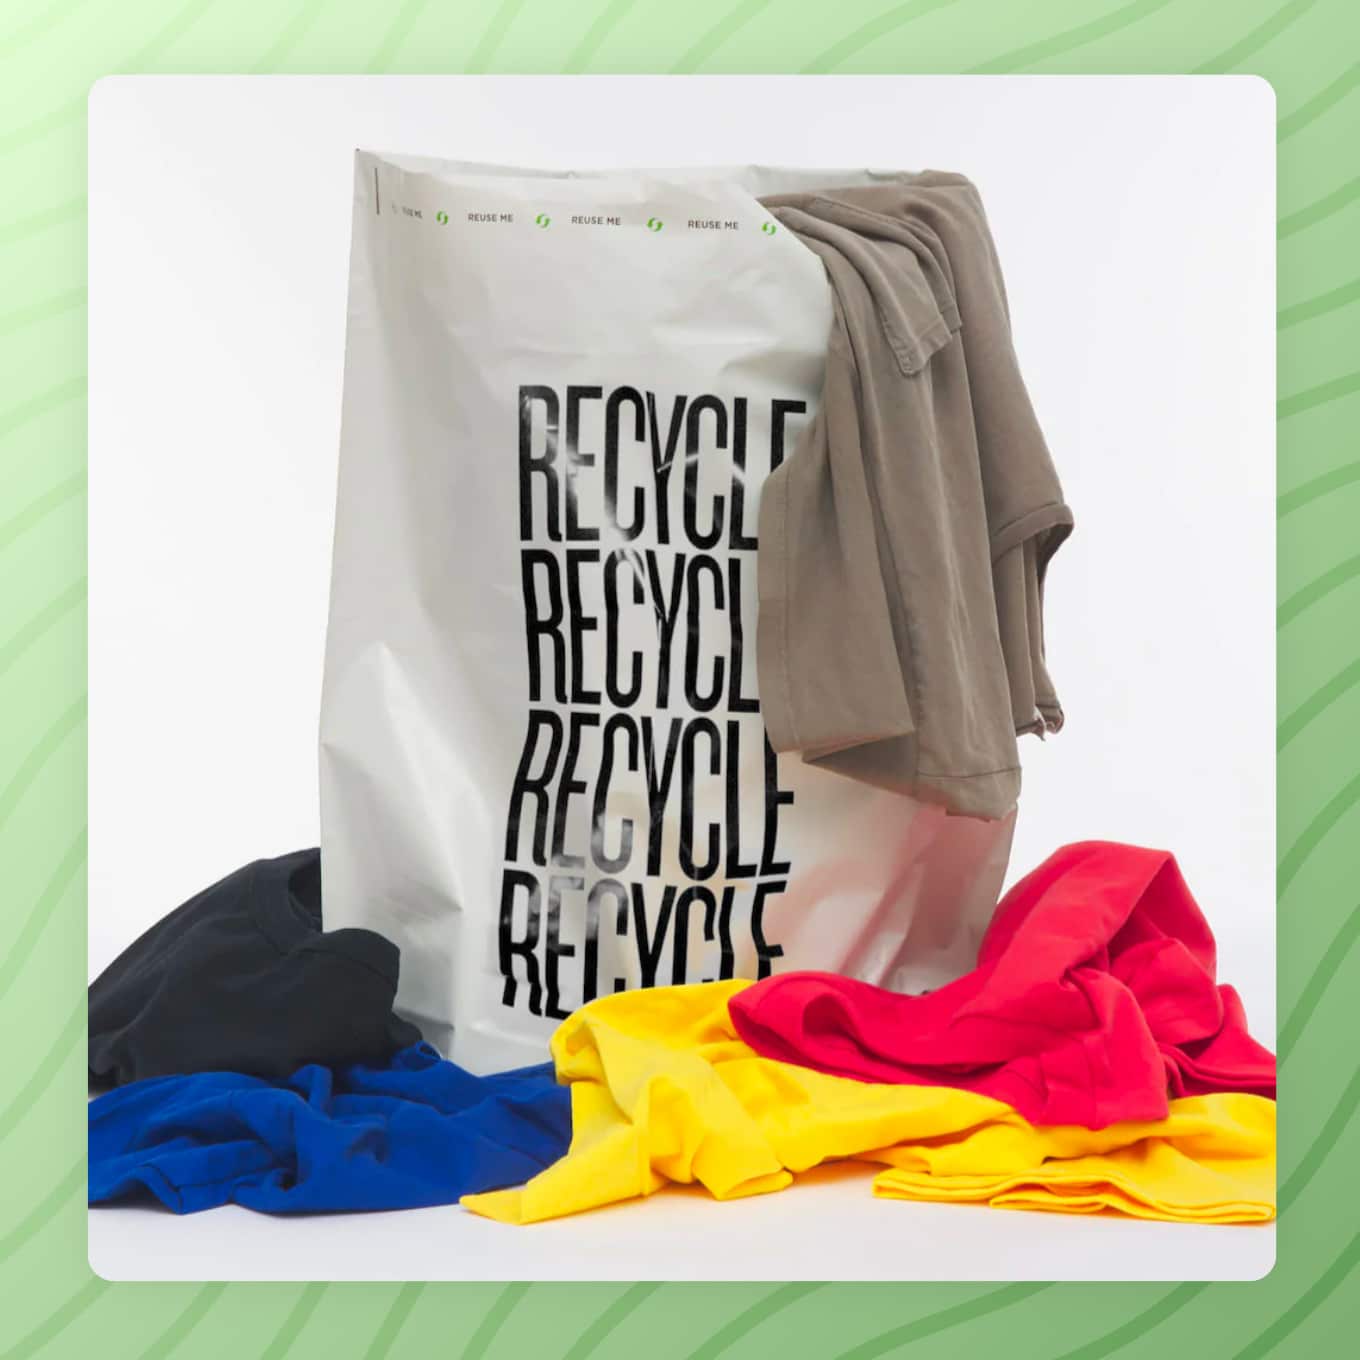 Plastic bag that rays "Recycle" with a bunch of clothes around it